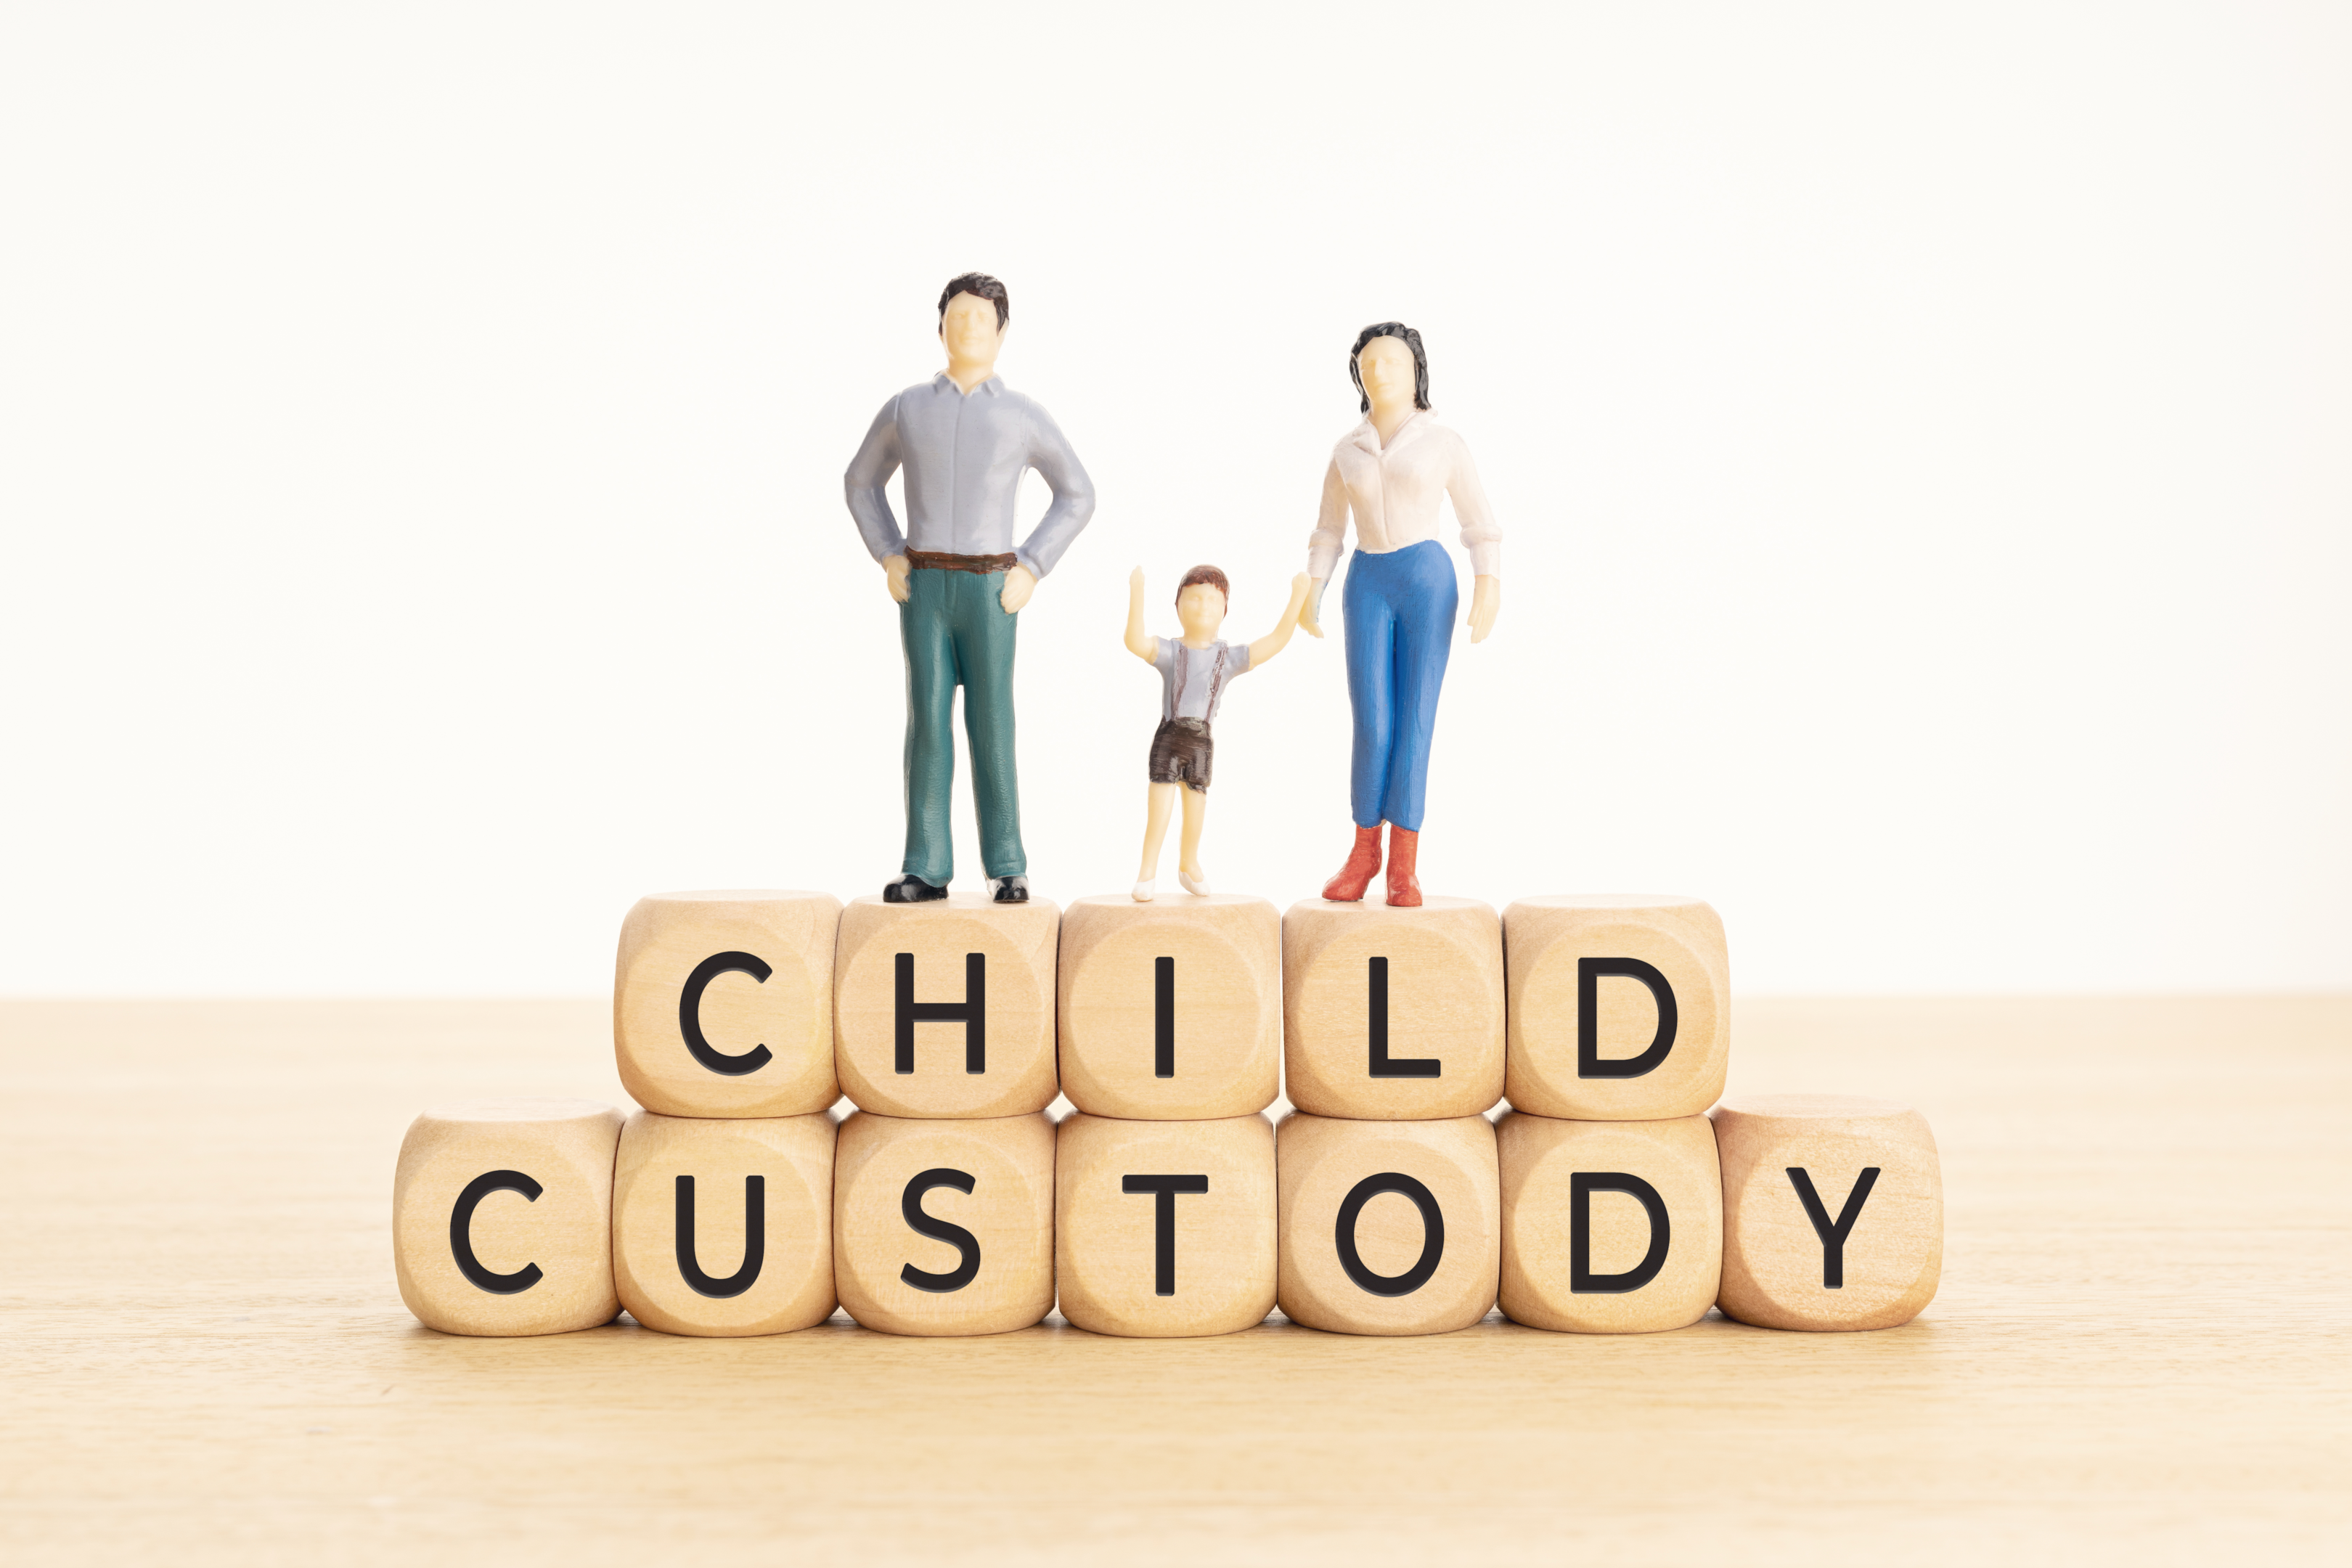 Facing Family Court in Sacramento, CA? Trust Our Dedicated Divorce Attorney at Our Law Office. From Child Custody Cases to Custody Hearings, we provide a strong legal perspective and compassionate representation. Contact us for guidance and support throughout the process